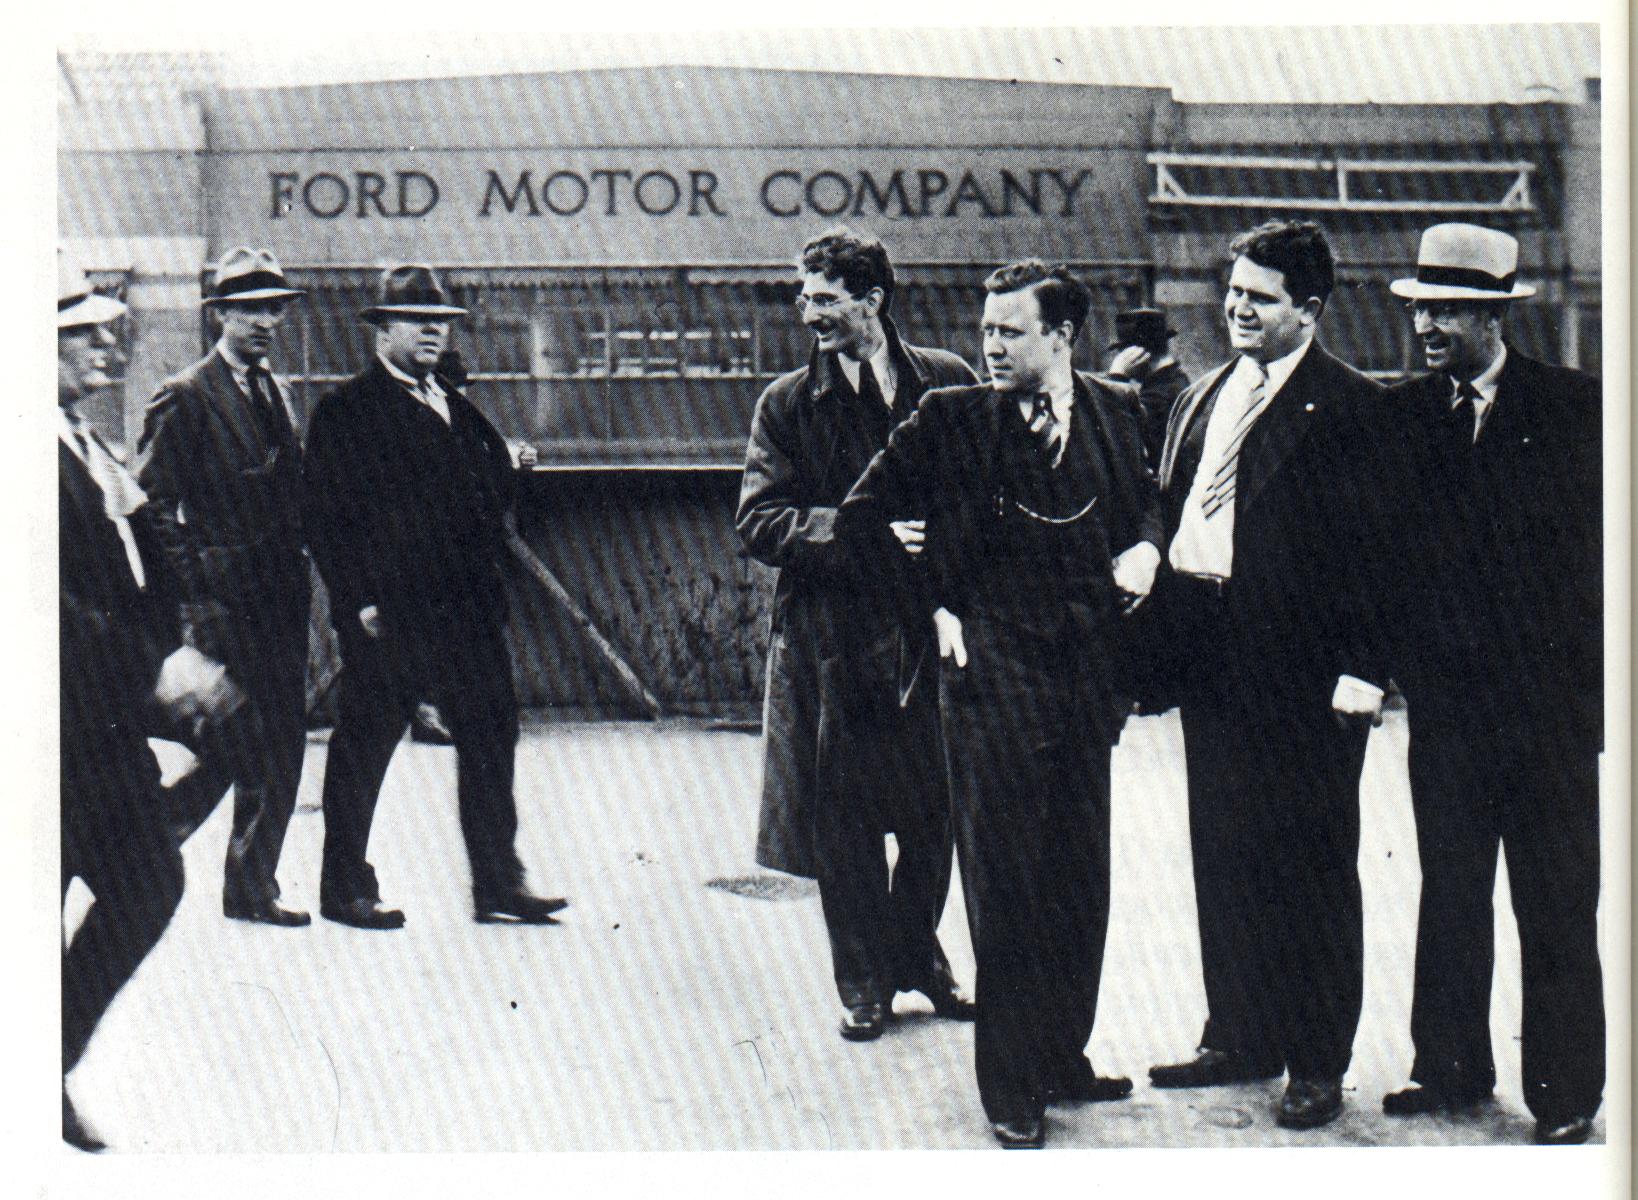 Ford Motor Company - Battle of the overpass